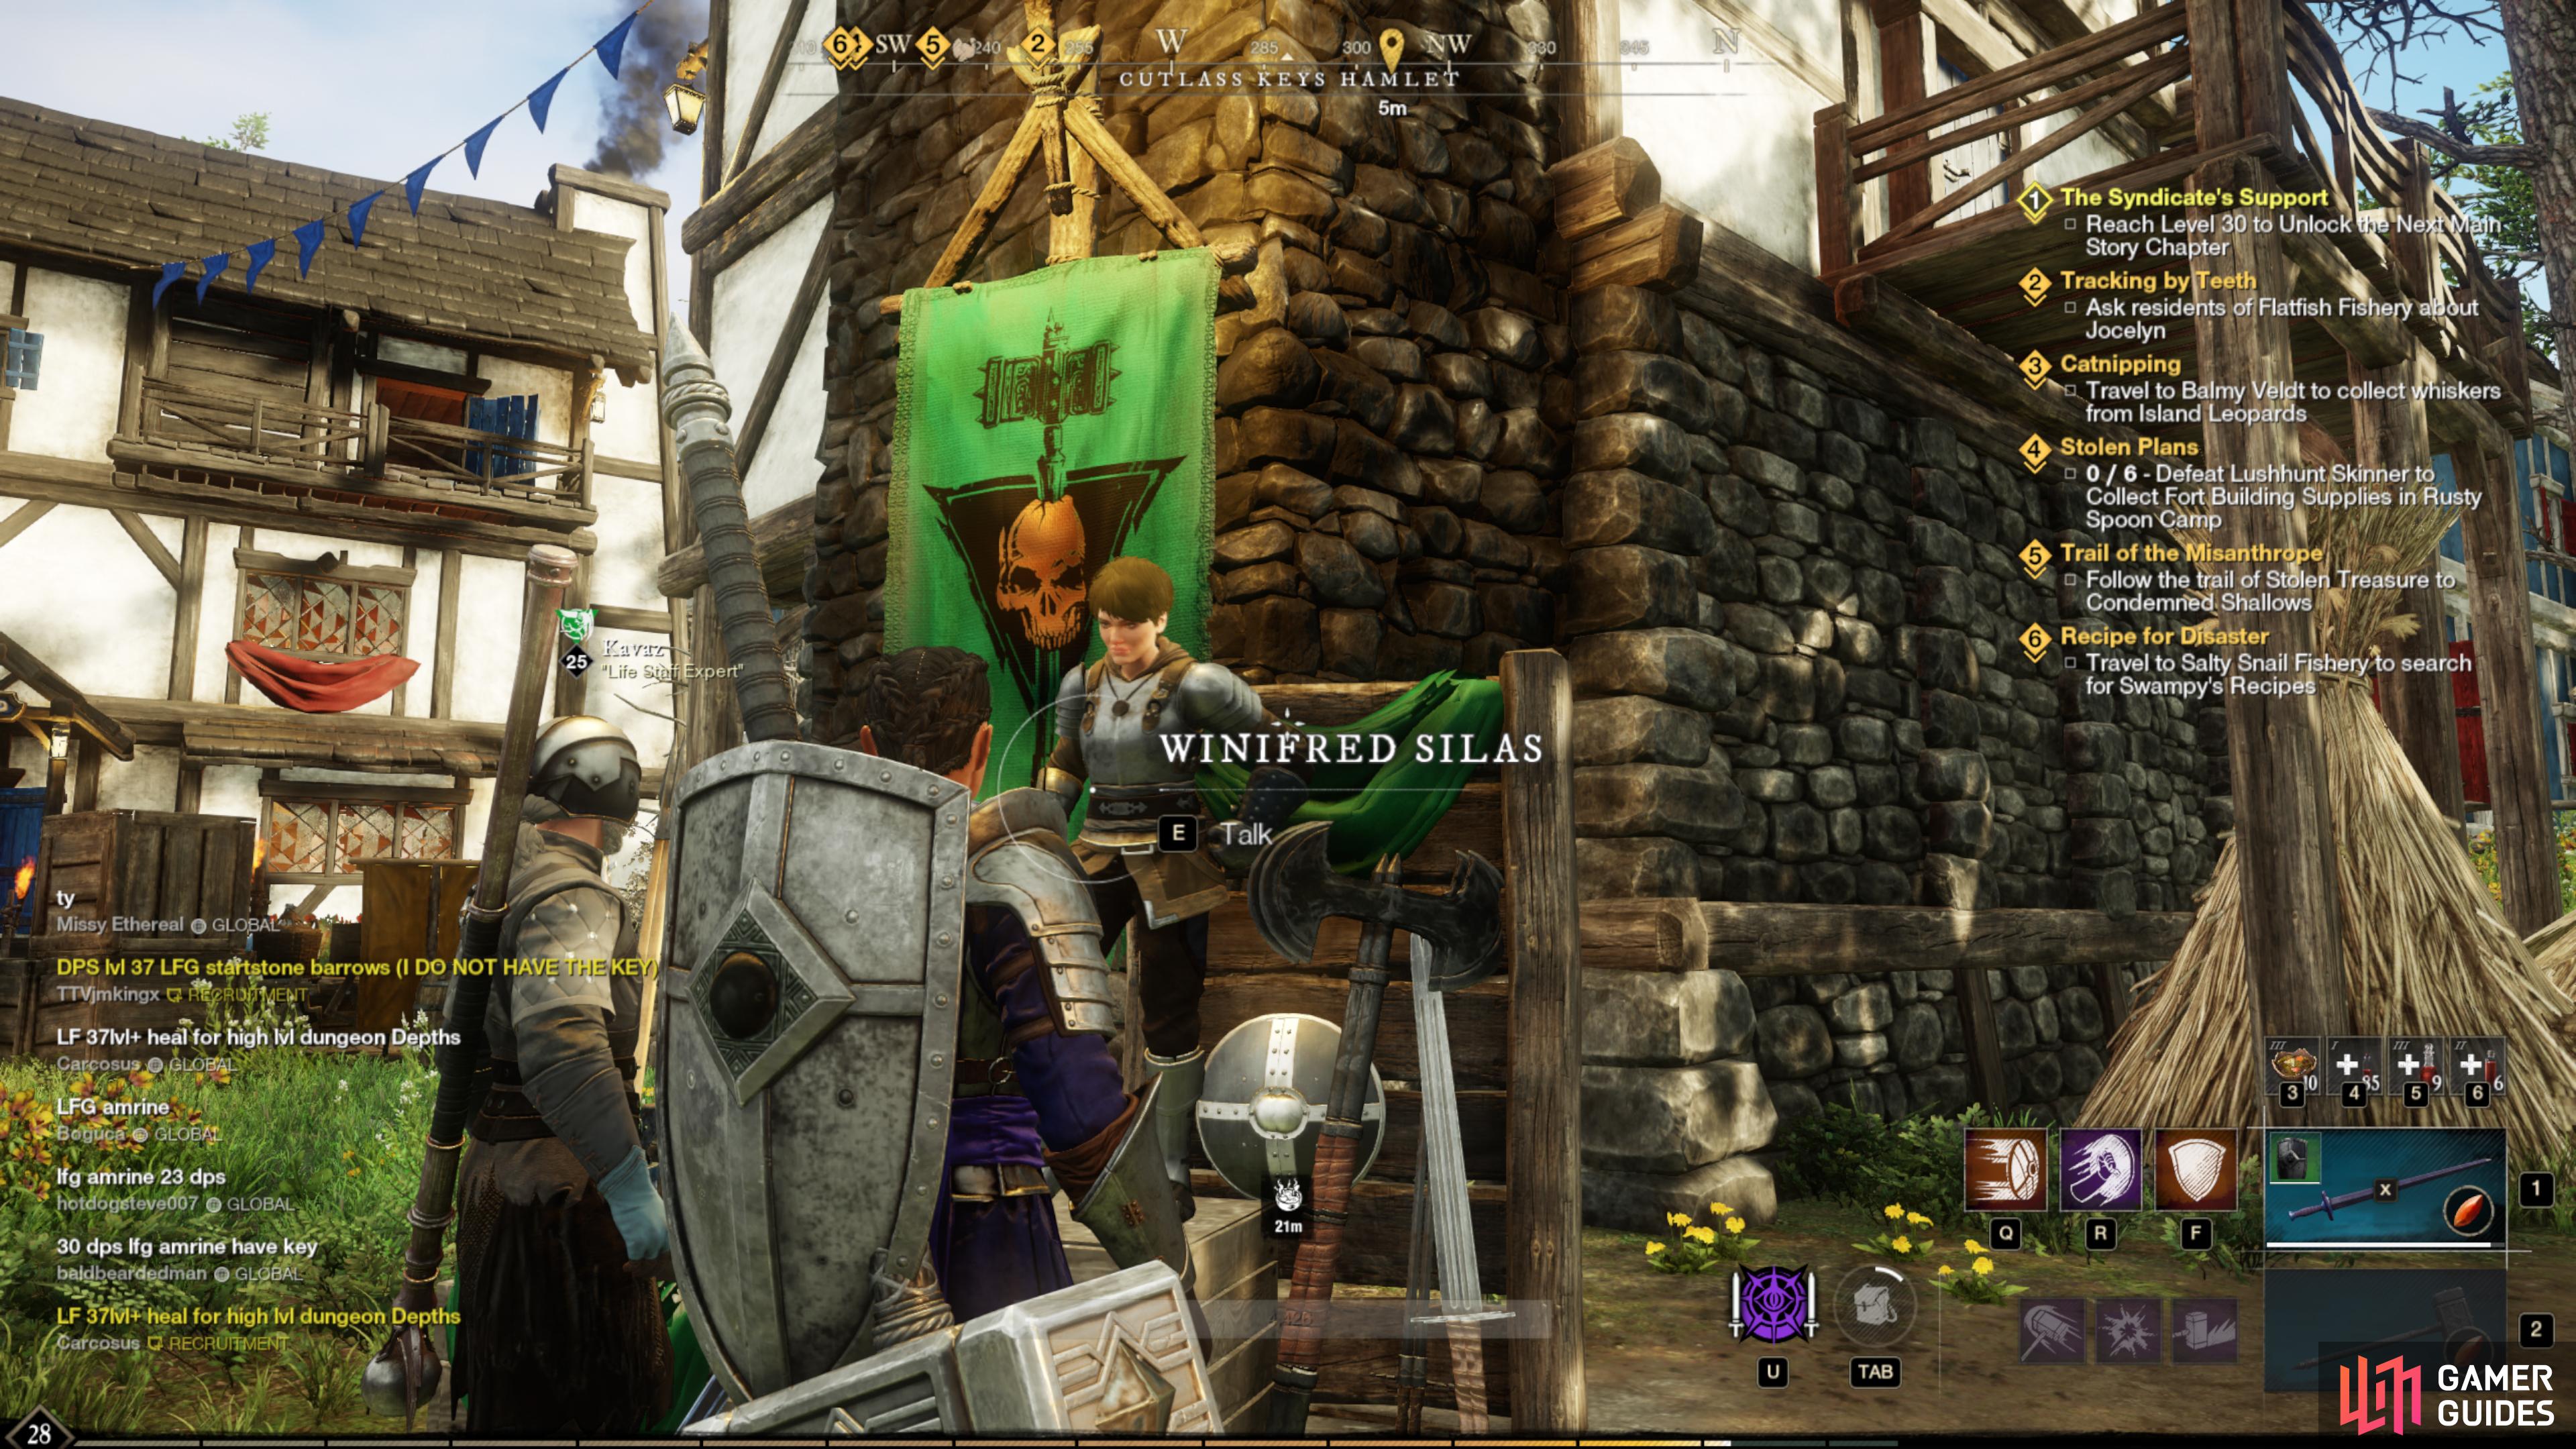 You can accept Trial of the Gladiator at Cutlass Keys Hamlet at Level 24.